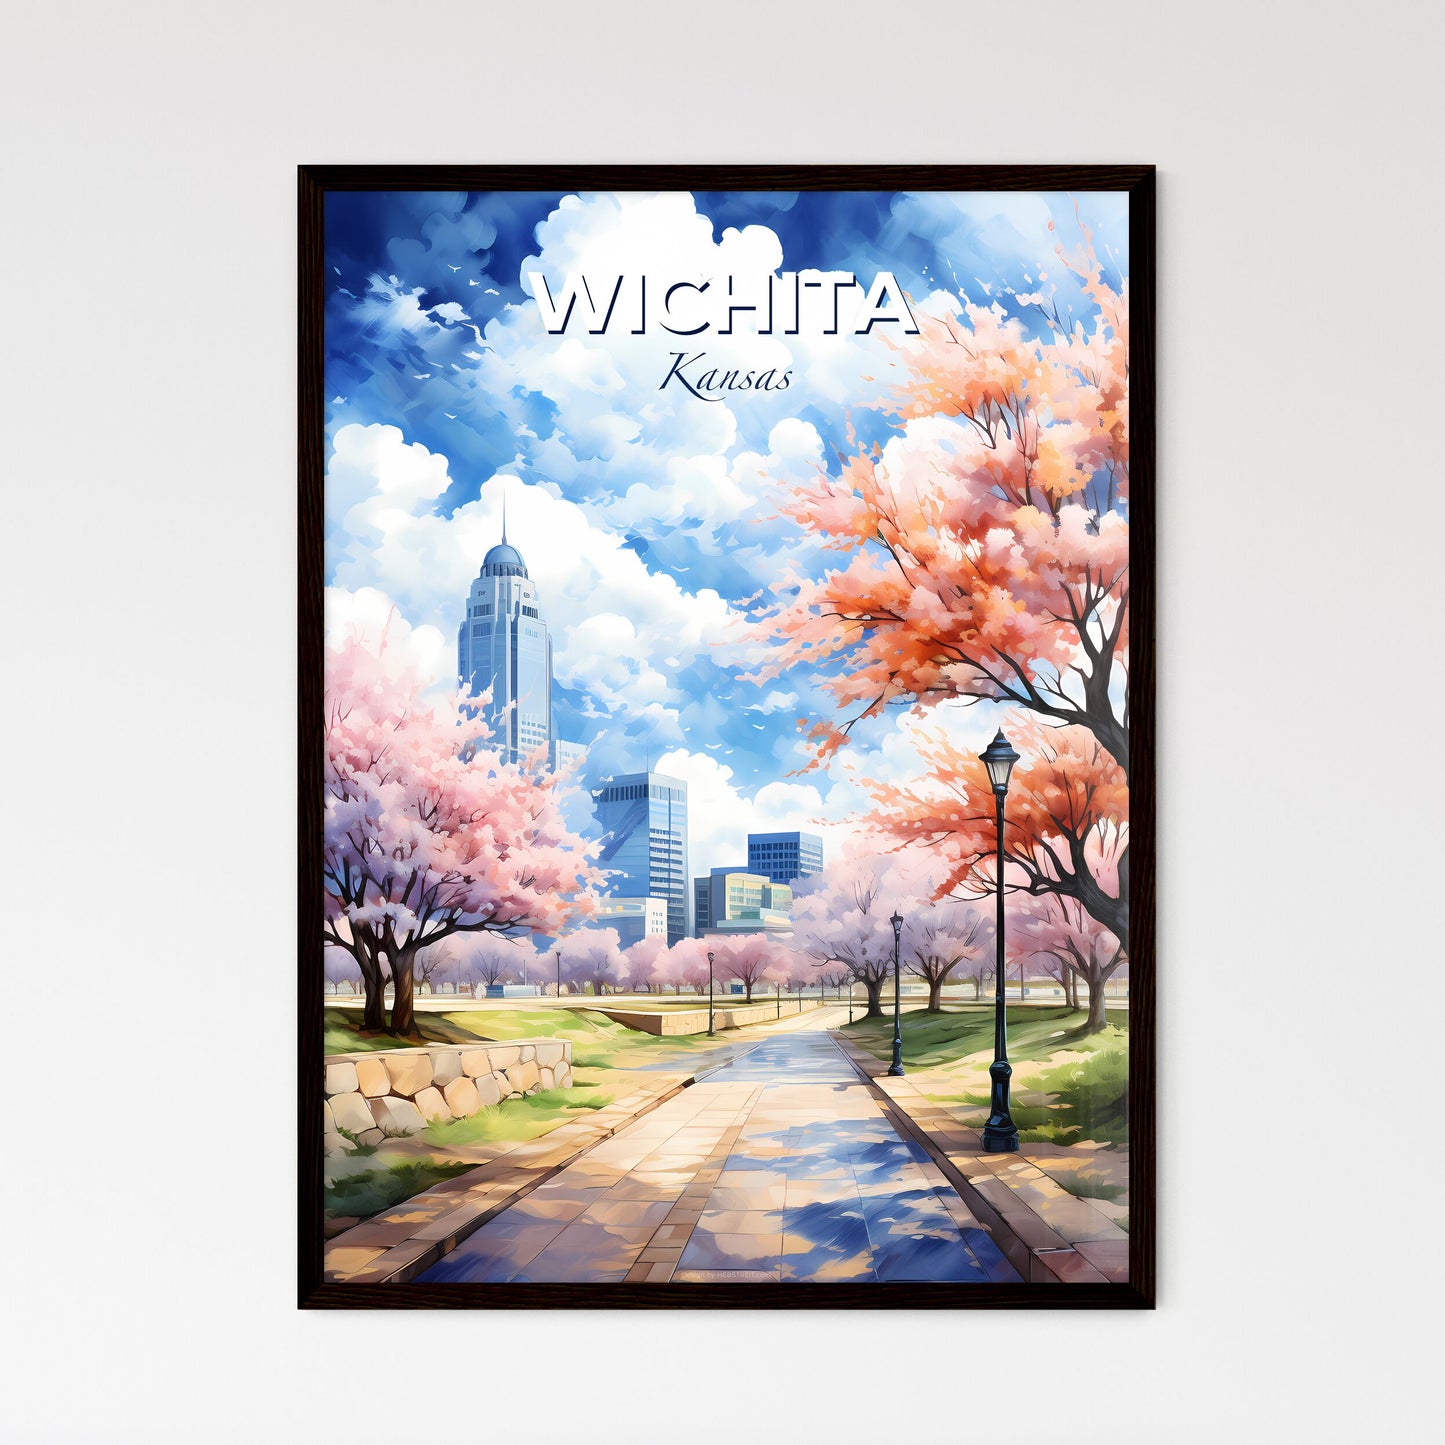 Wichita Kansas Skyline - A Park With Pink Trees And A City In The Background - Customizable Travel Gift Default Title